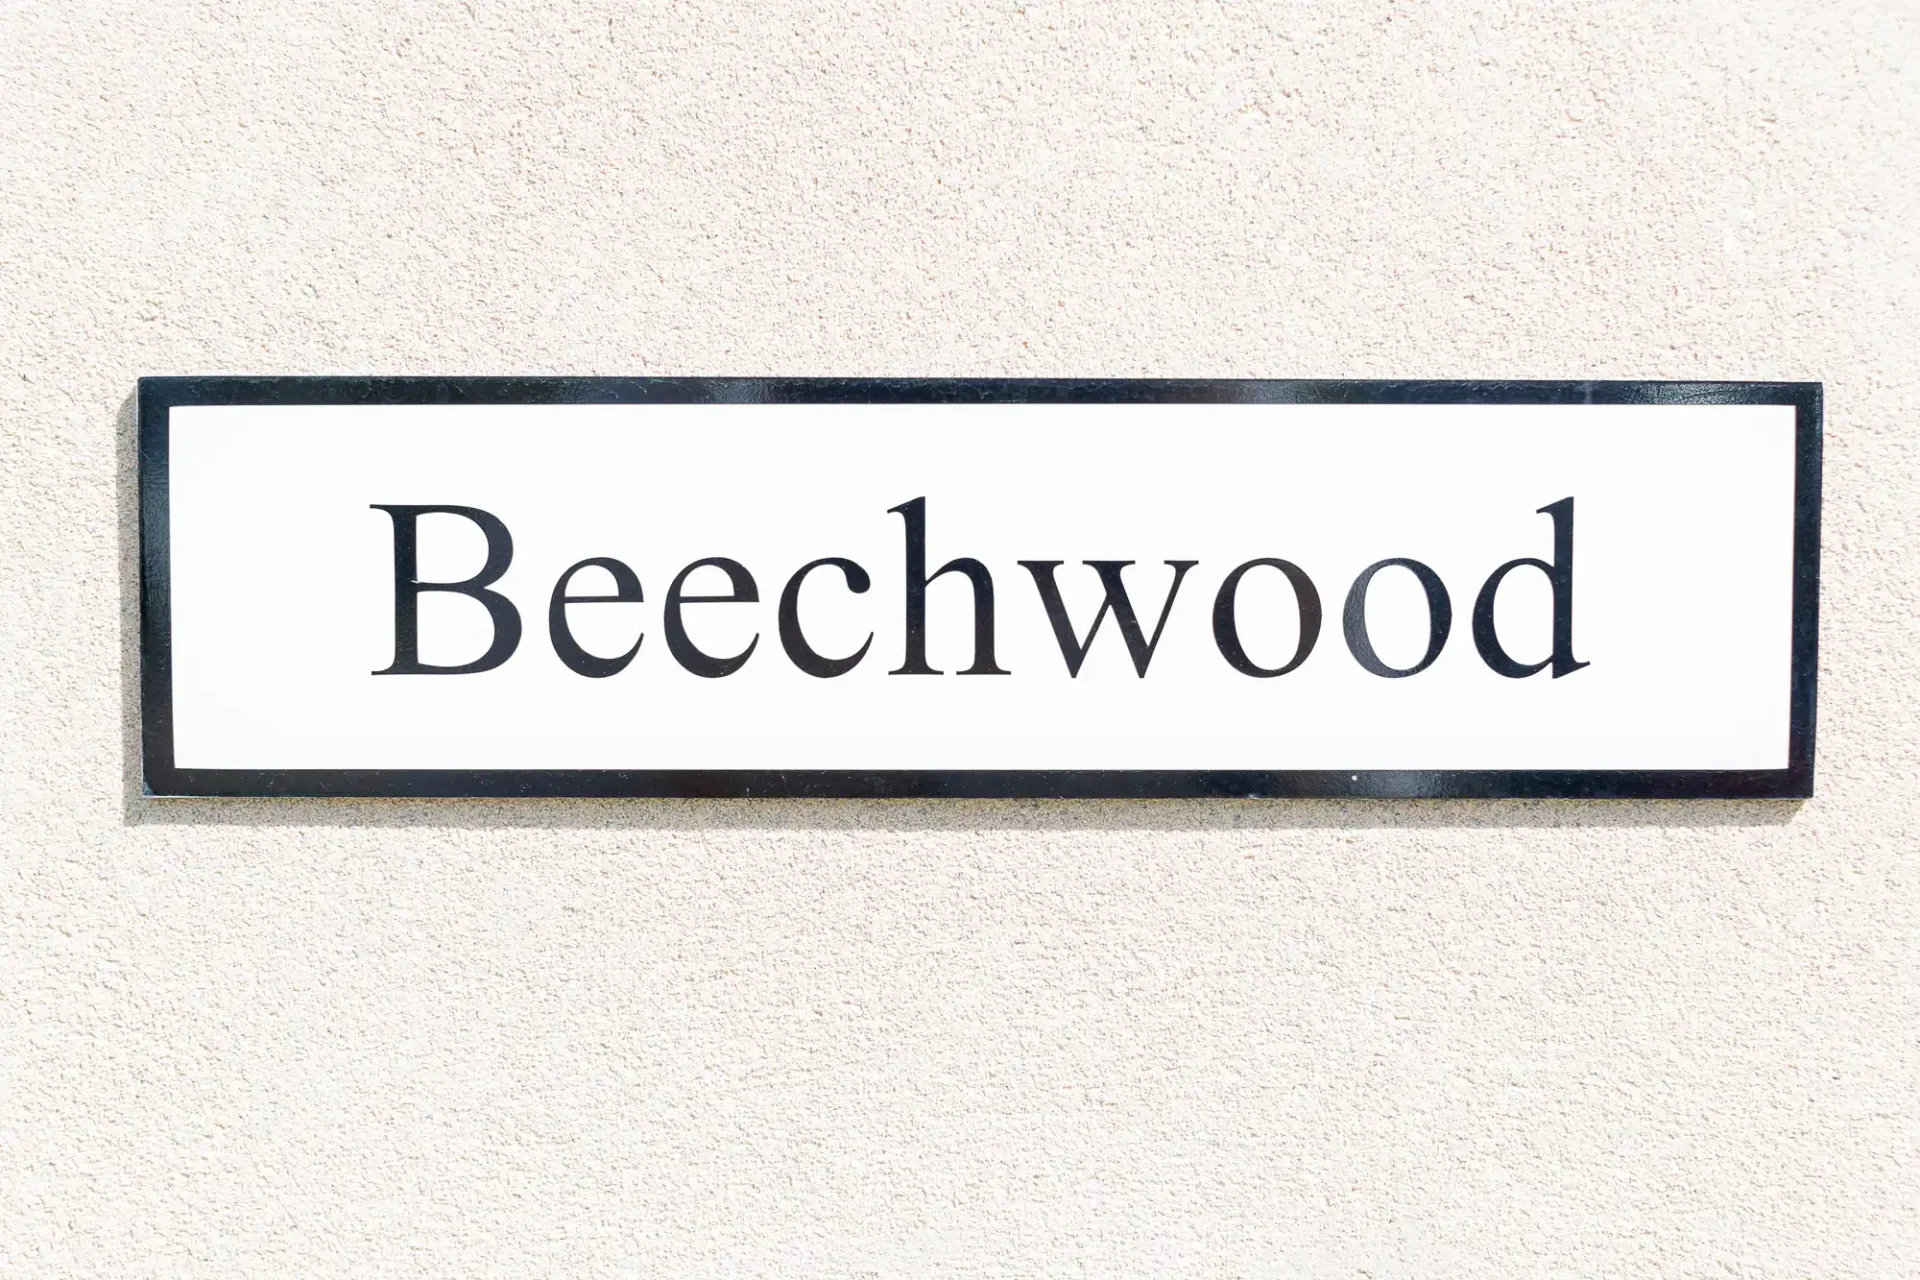 A rectangular sign with the word "beechwood" in black letters, centered on a white background, mounted on a textured beige wall.